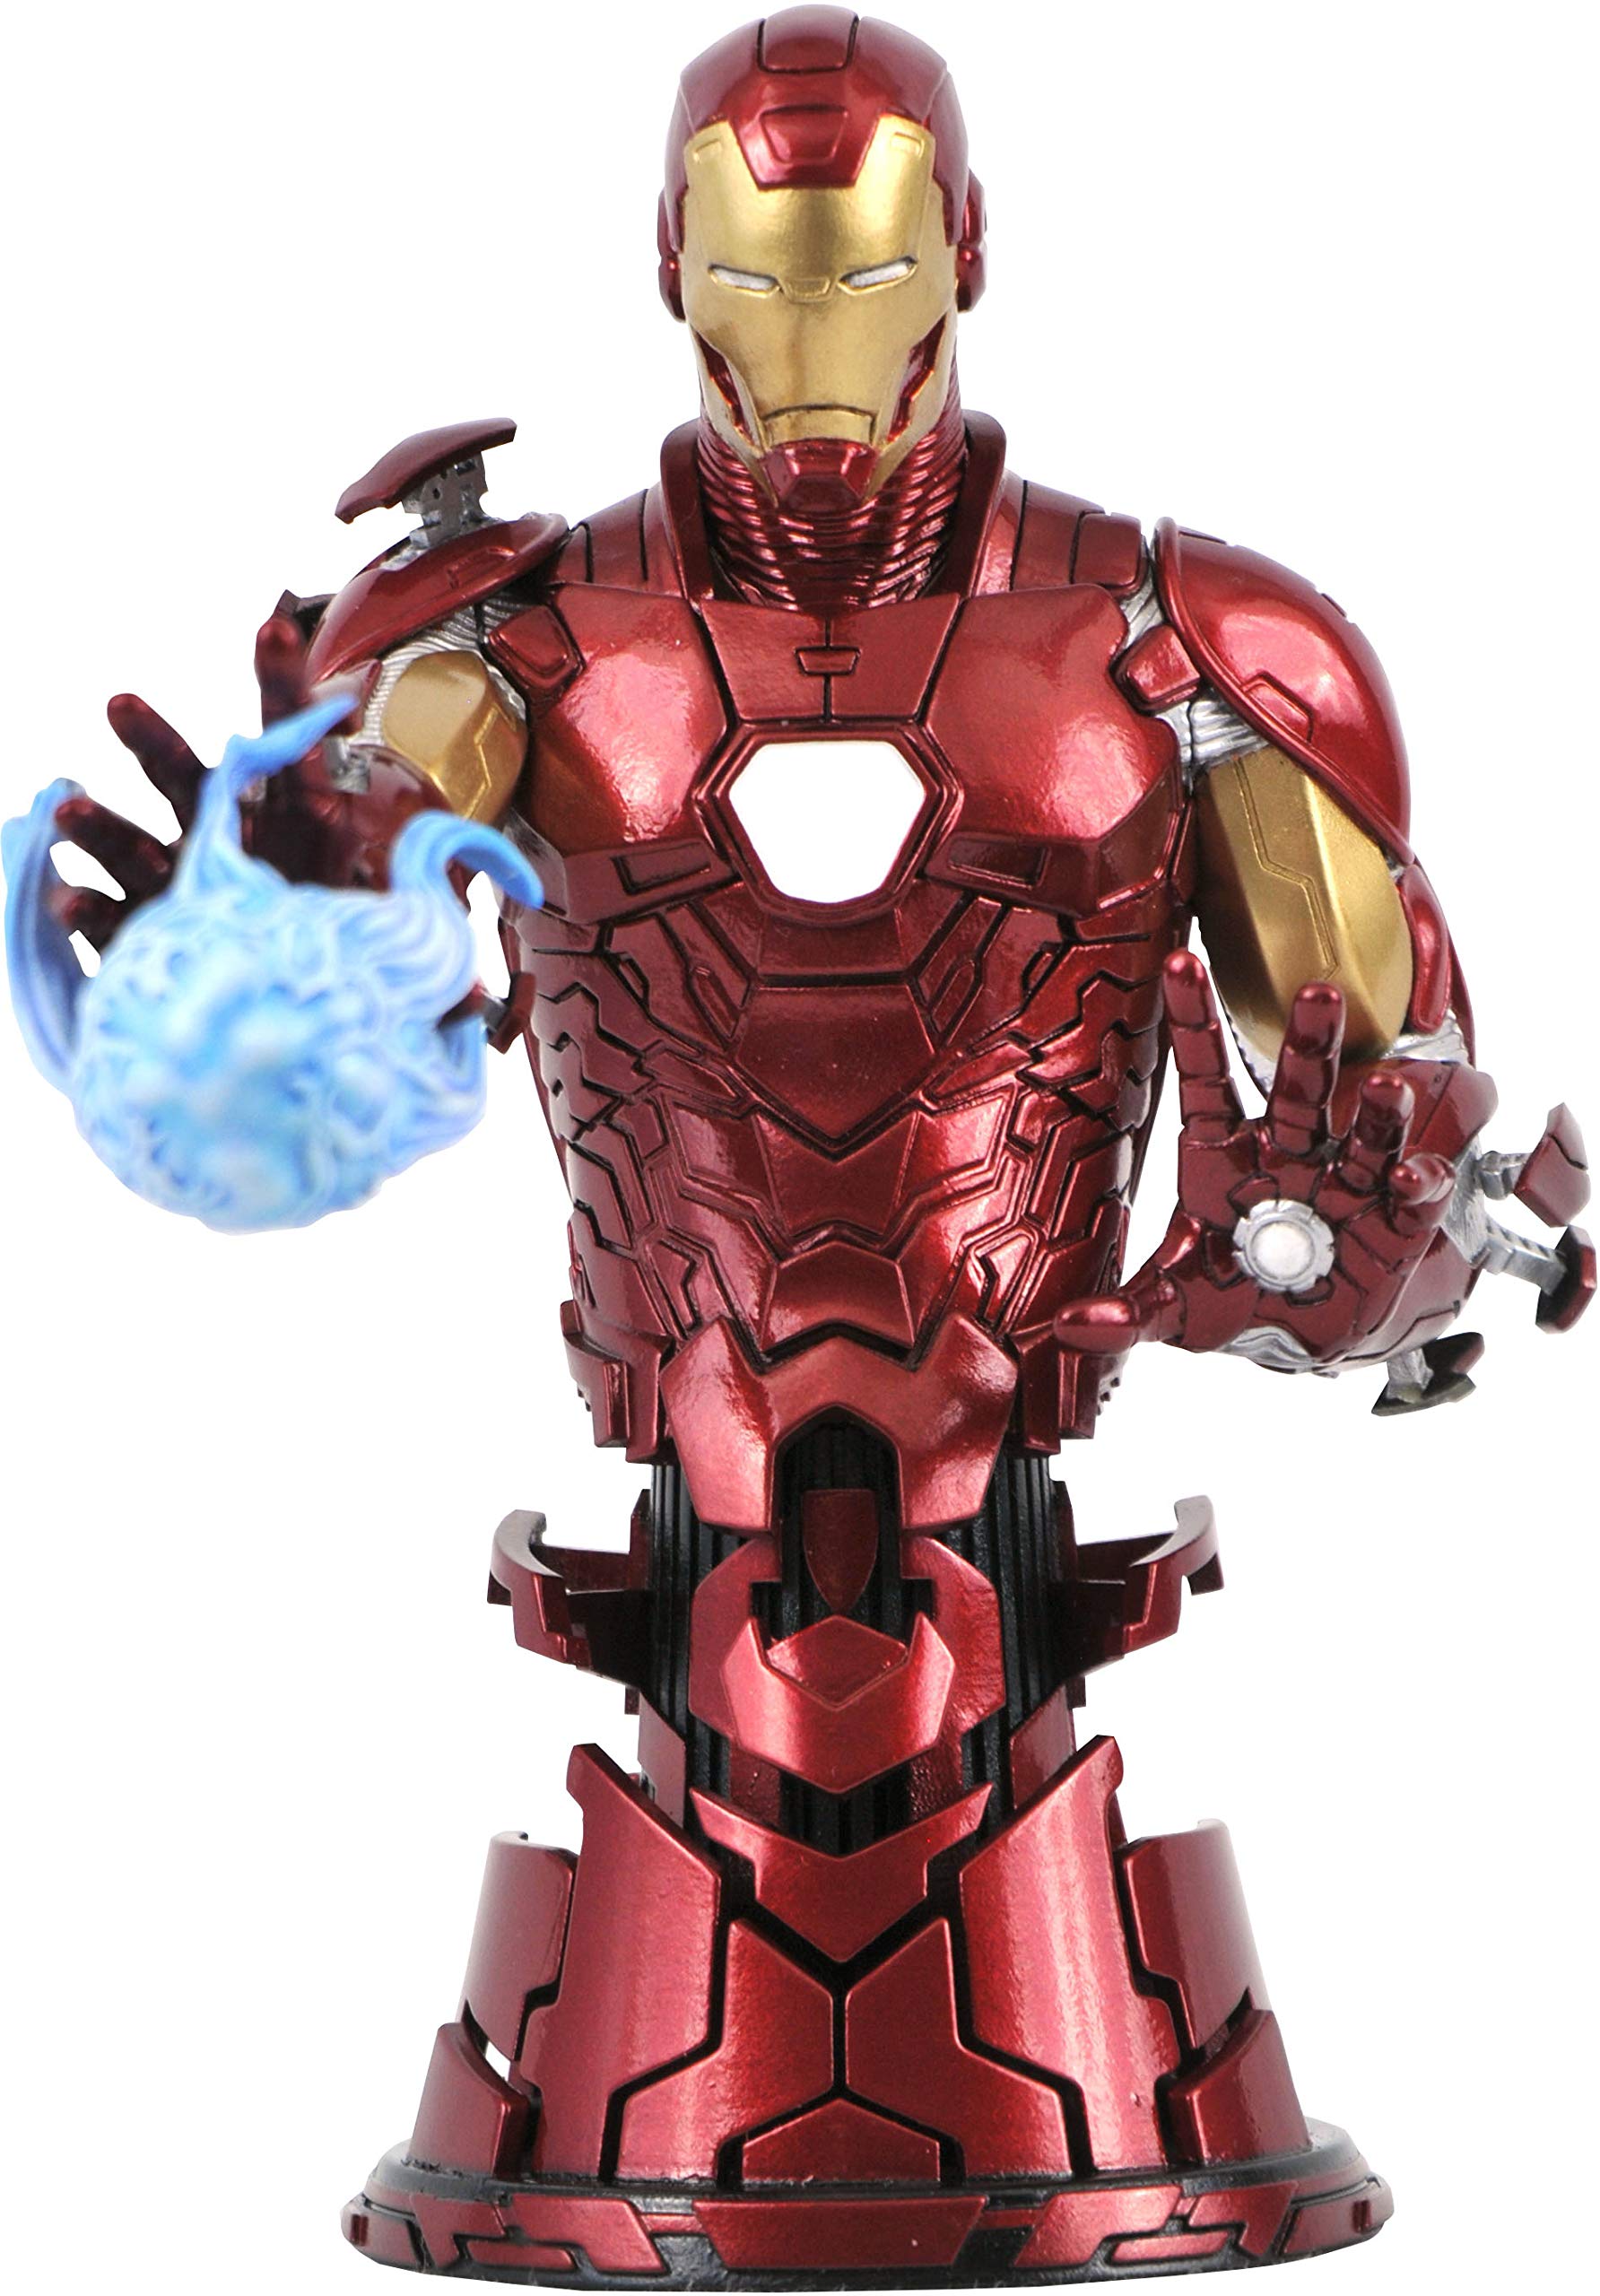 DIAMOND SELECT TOYS Marvel: Iron Man Bust, 6 inches